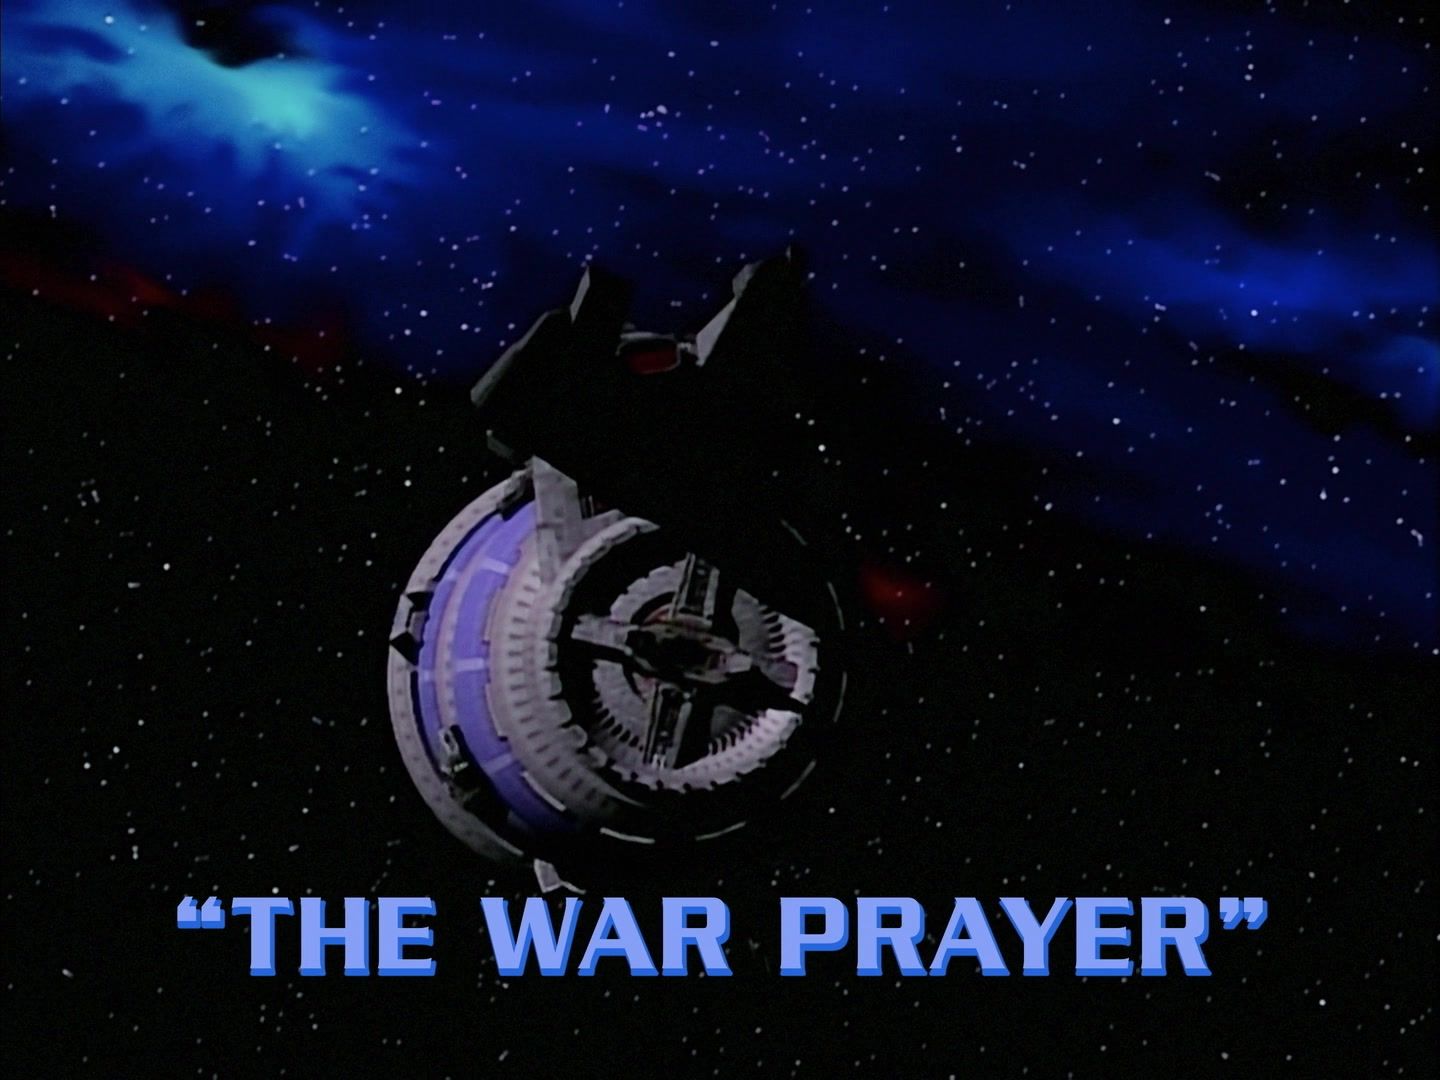 The opening shot of Babylon 5 with the words “The War Prayer.”